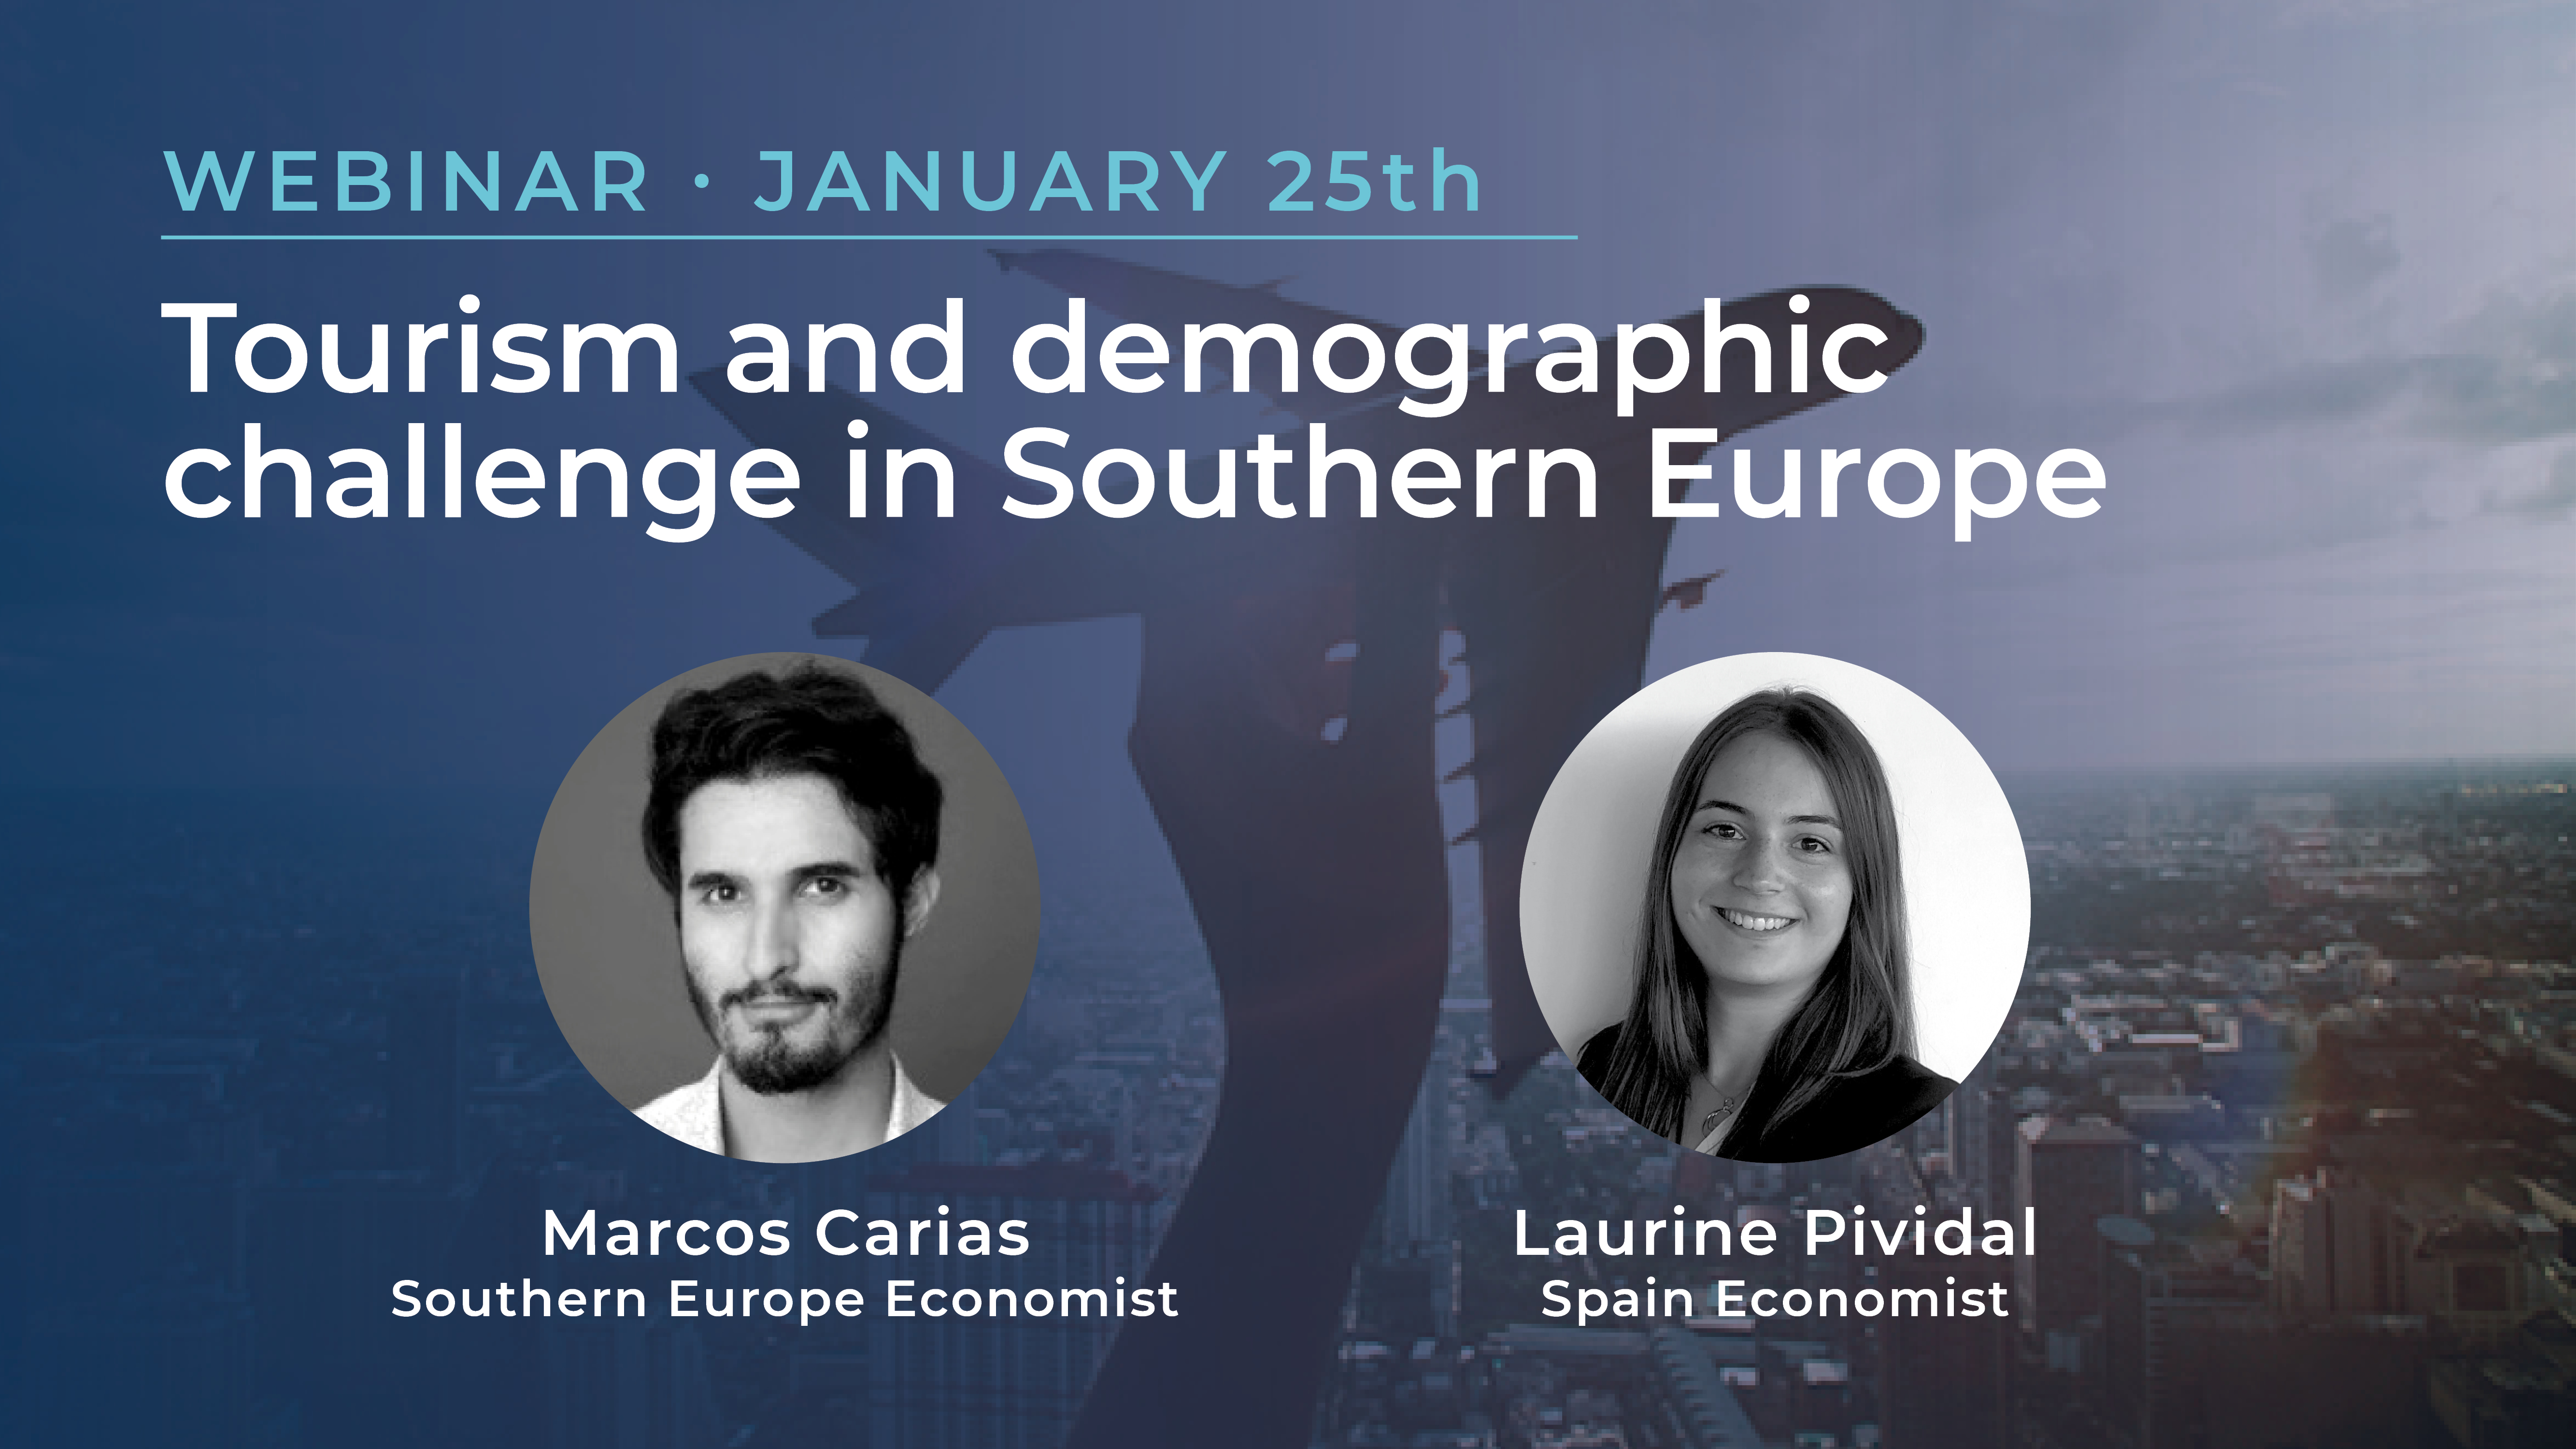 Webinar on January 25th: Tourism and demographic challenge in Southern Europe, with the pictures of Marcos Carias (Southern Europe Economist); and Laurine Pividal (Spain Economist)